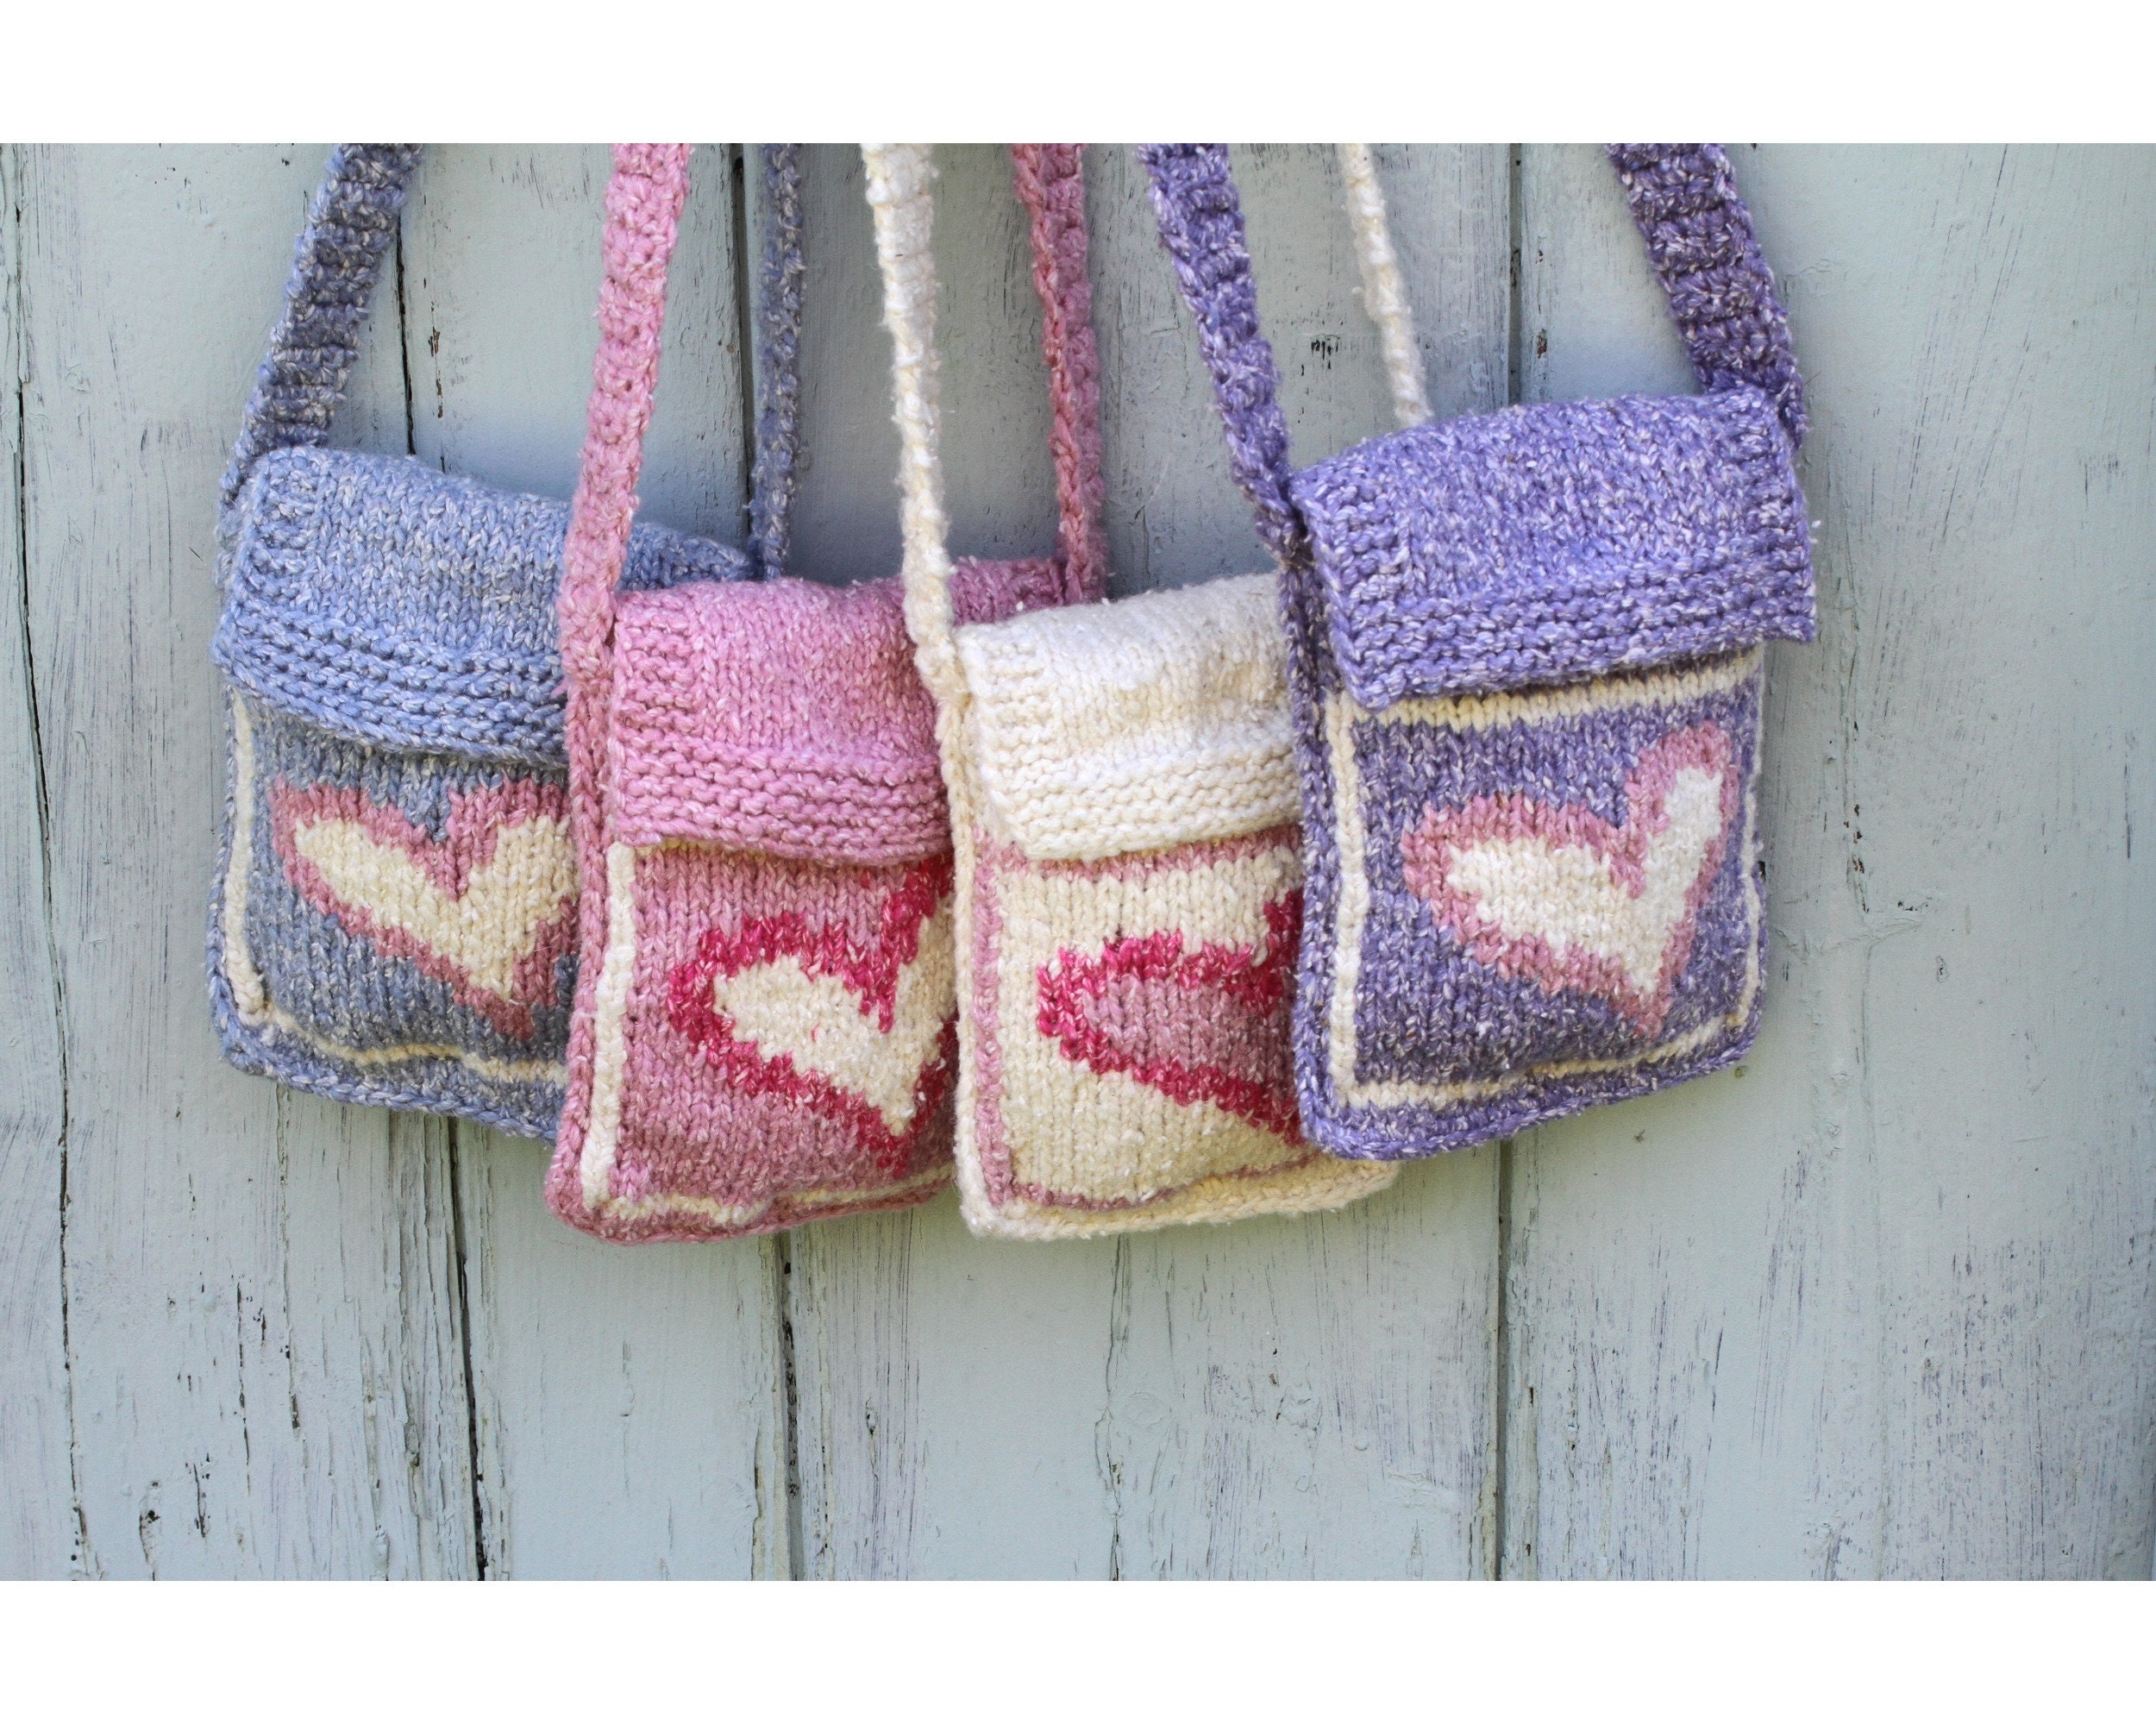 Cotton hand knitted bag for women, Great gift for her, Beach bag